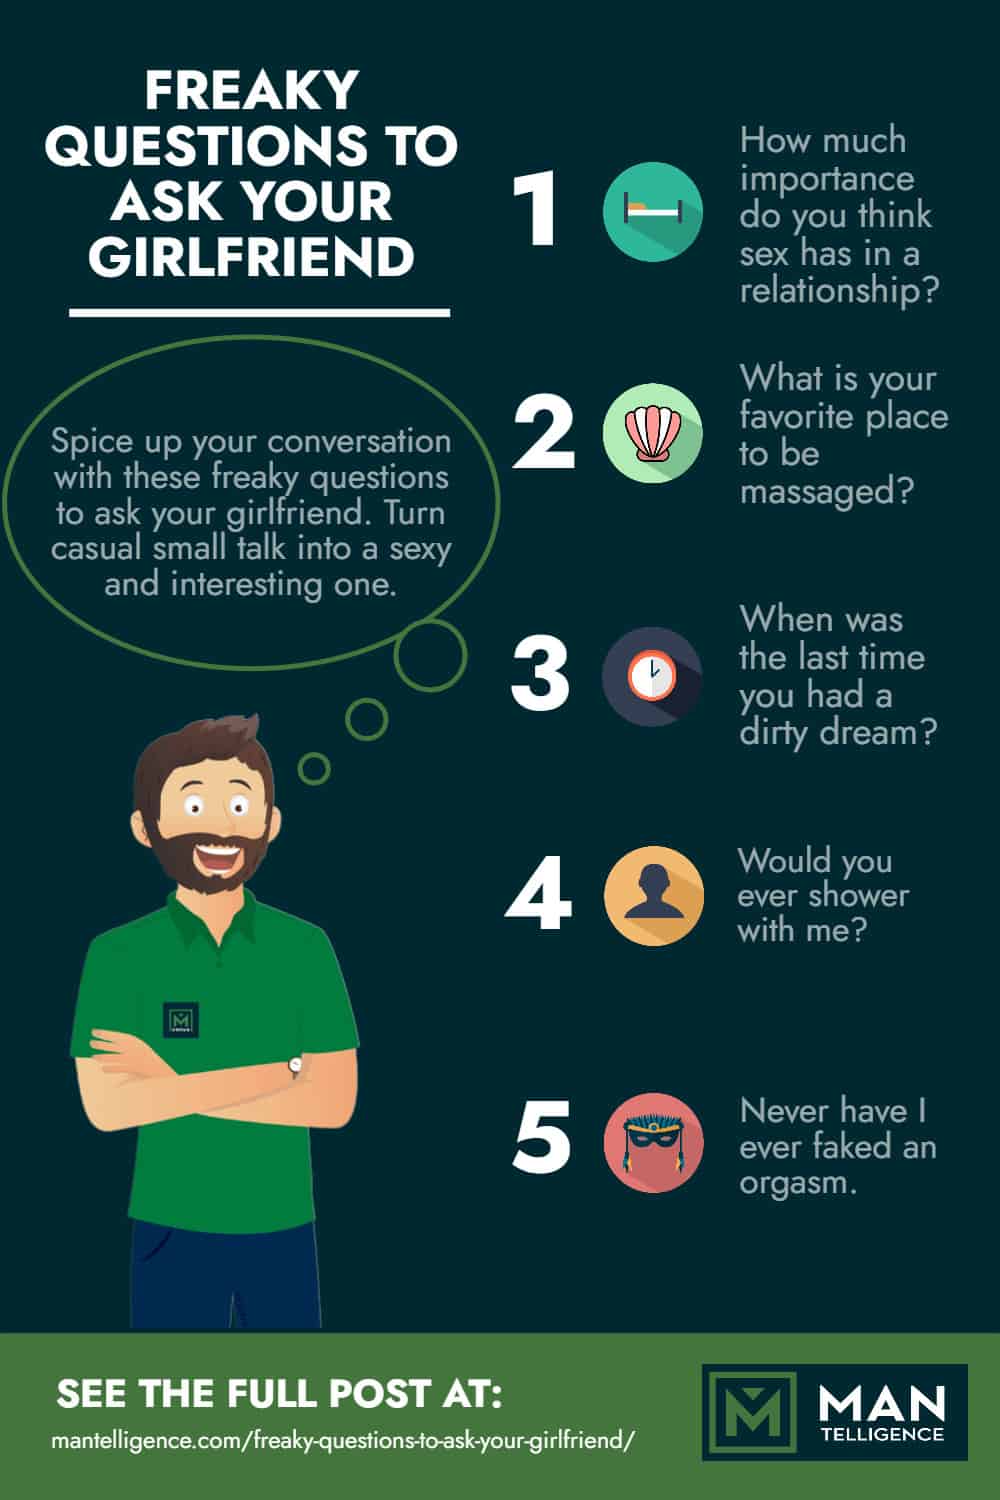 Freaky questions to ask your girlfriend - Infographic